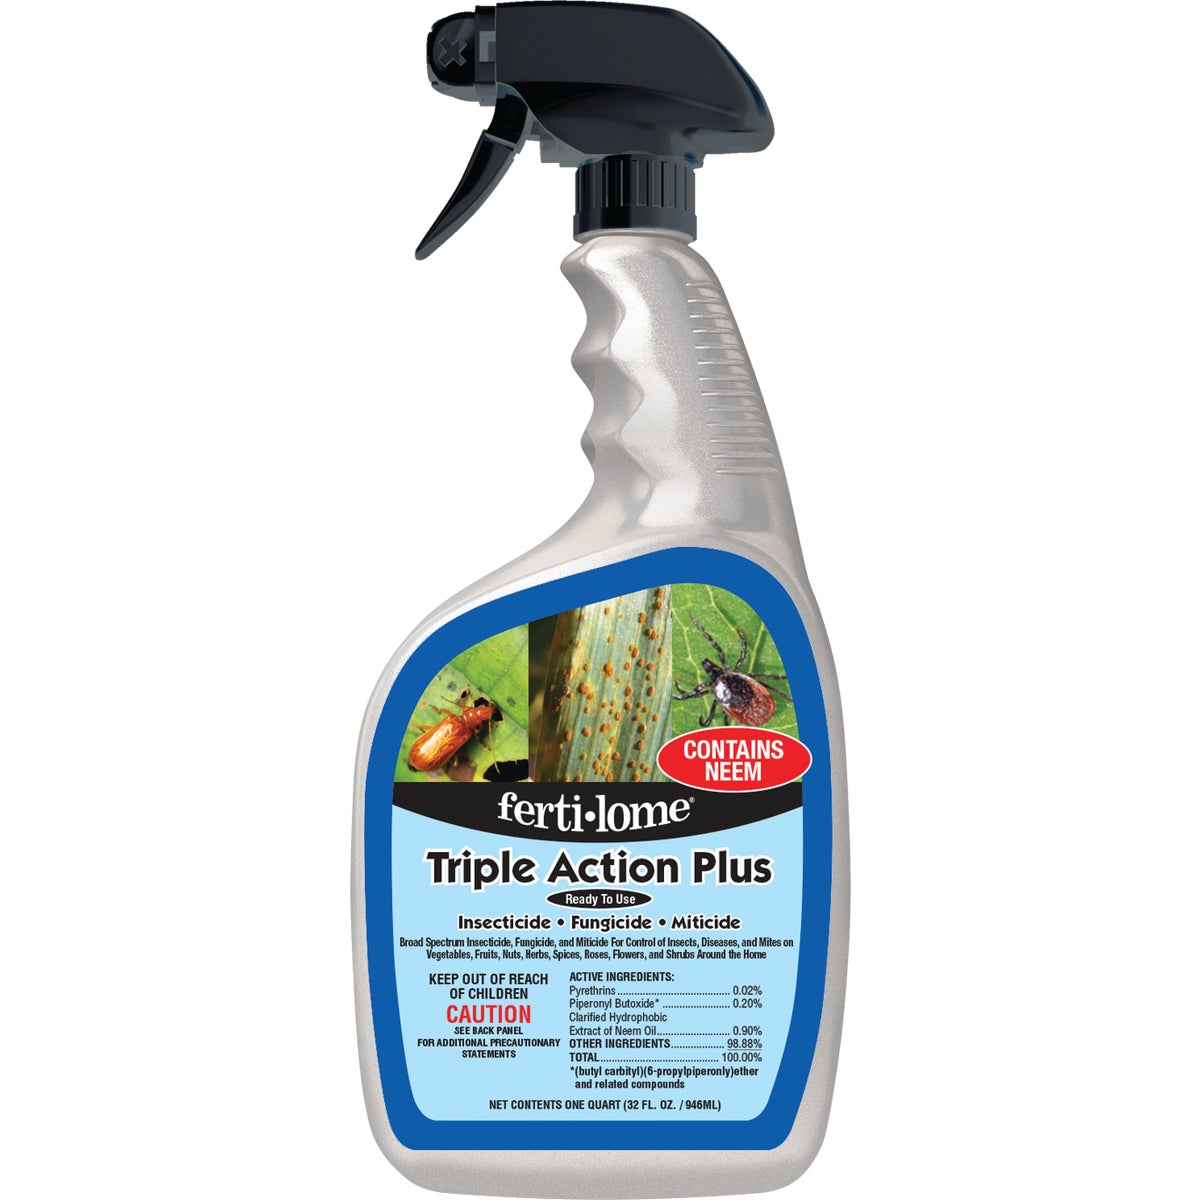 Ferti-lome Triple Action Plus 32 Oz. Ready To Use Trigger Spray Insect & Disease Killer